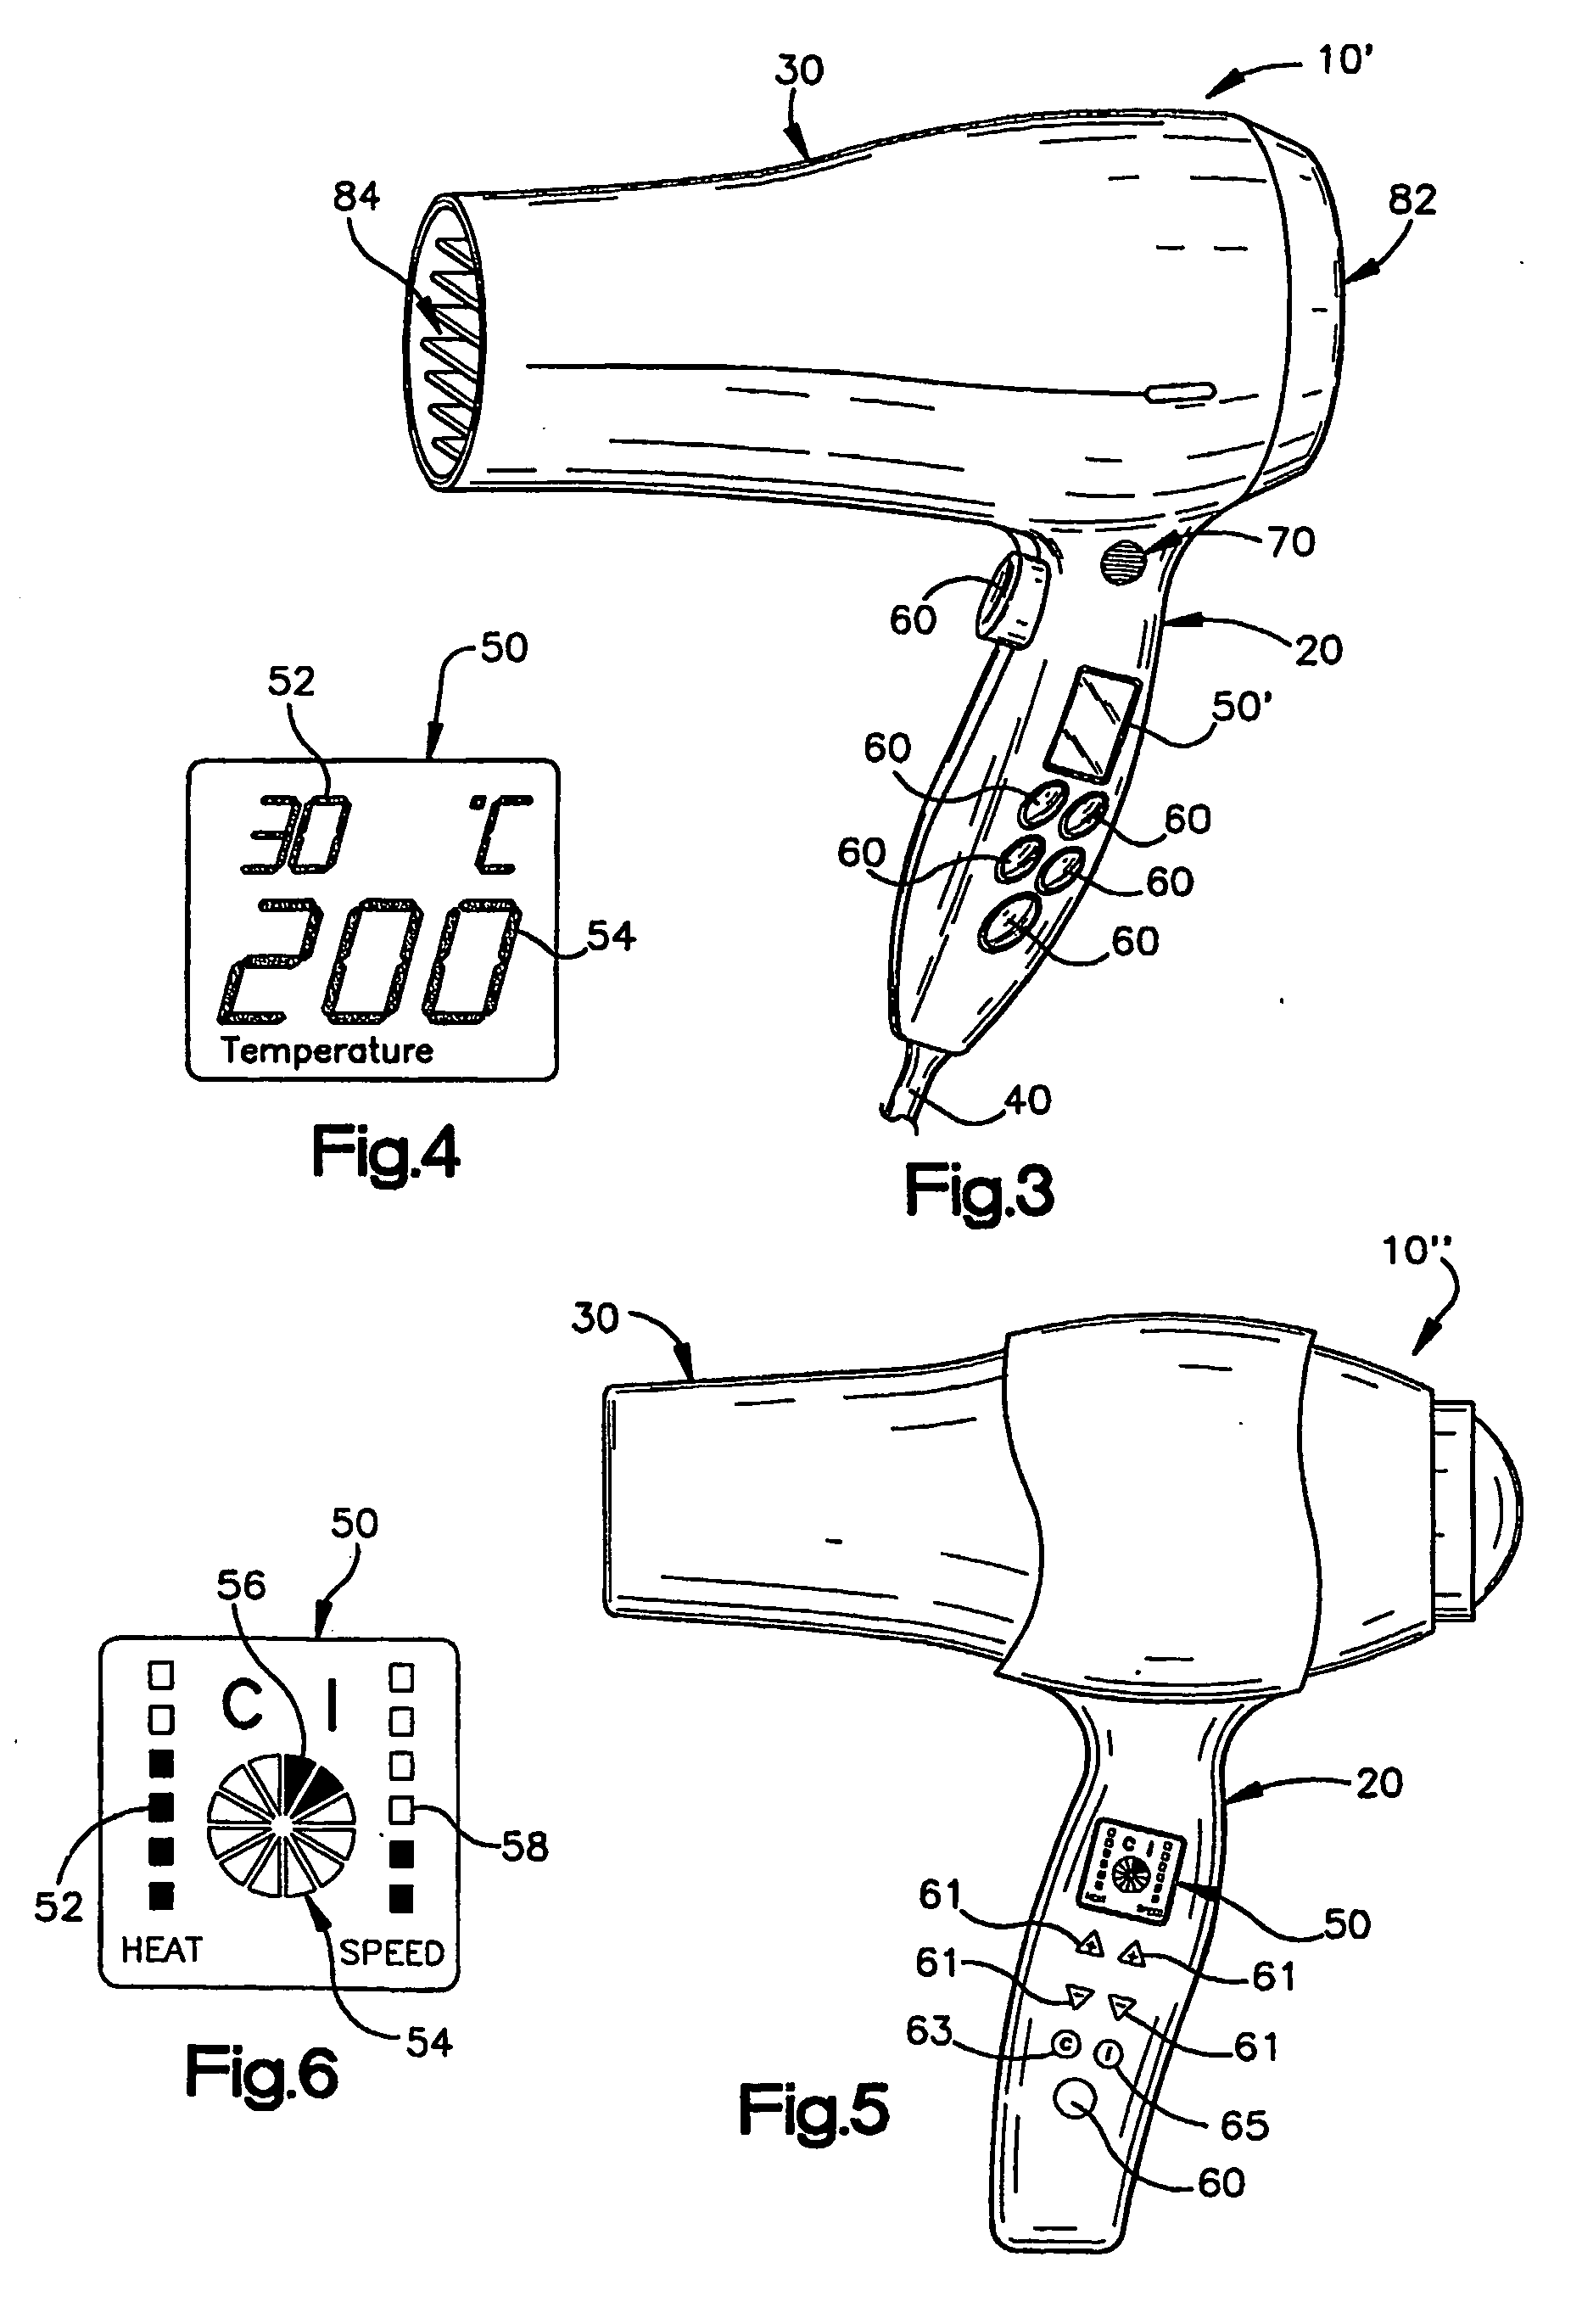 Visual user interface for hair styling apparatus